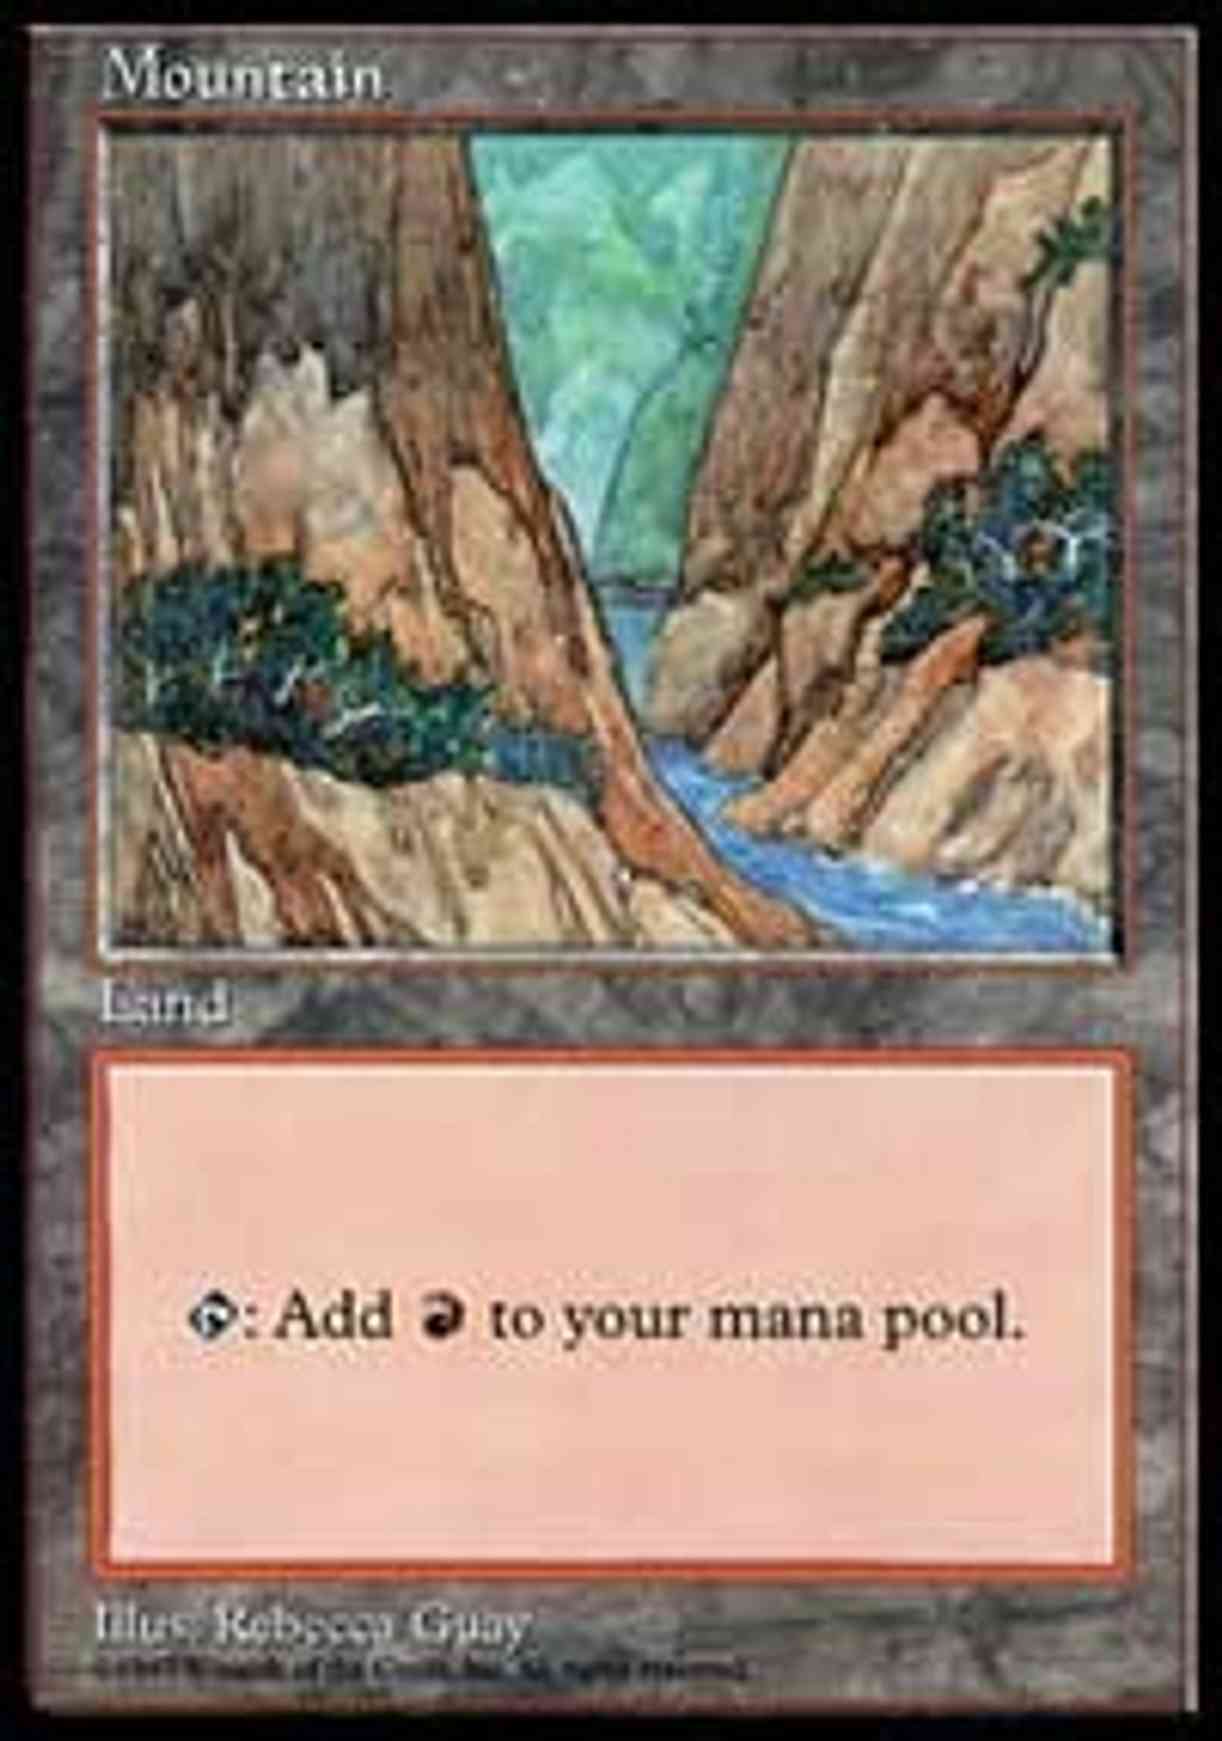 Mountain - Blue Pack (Guay) magic card front